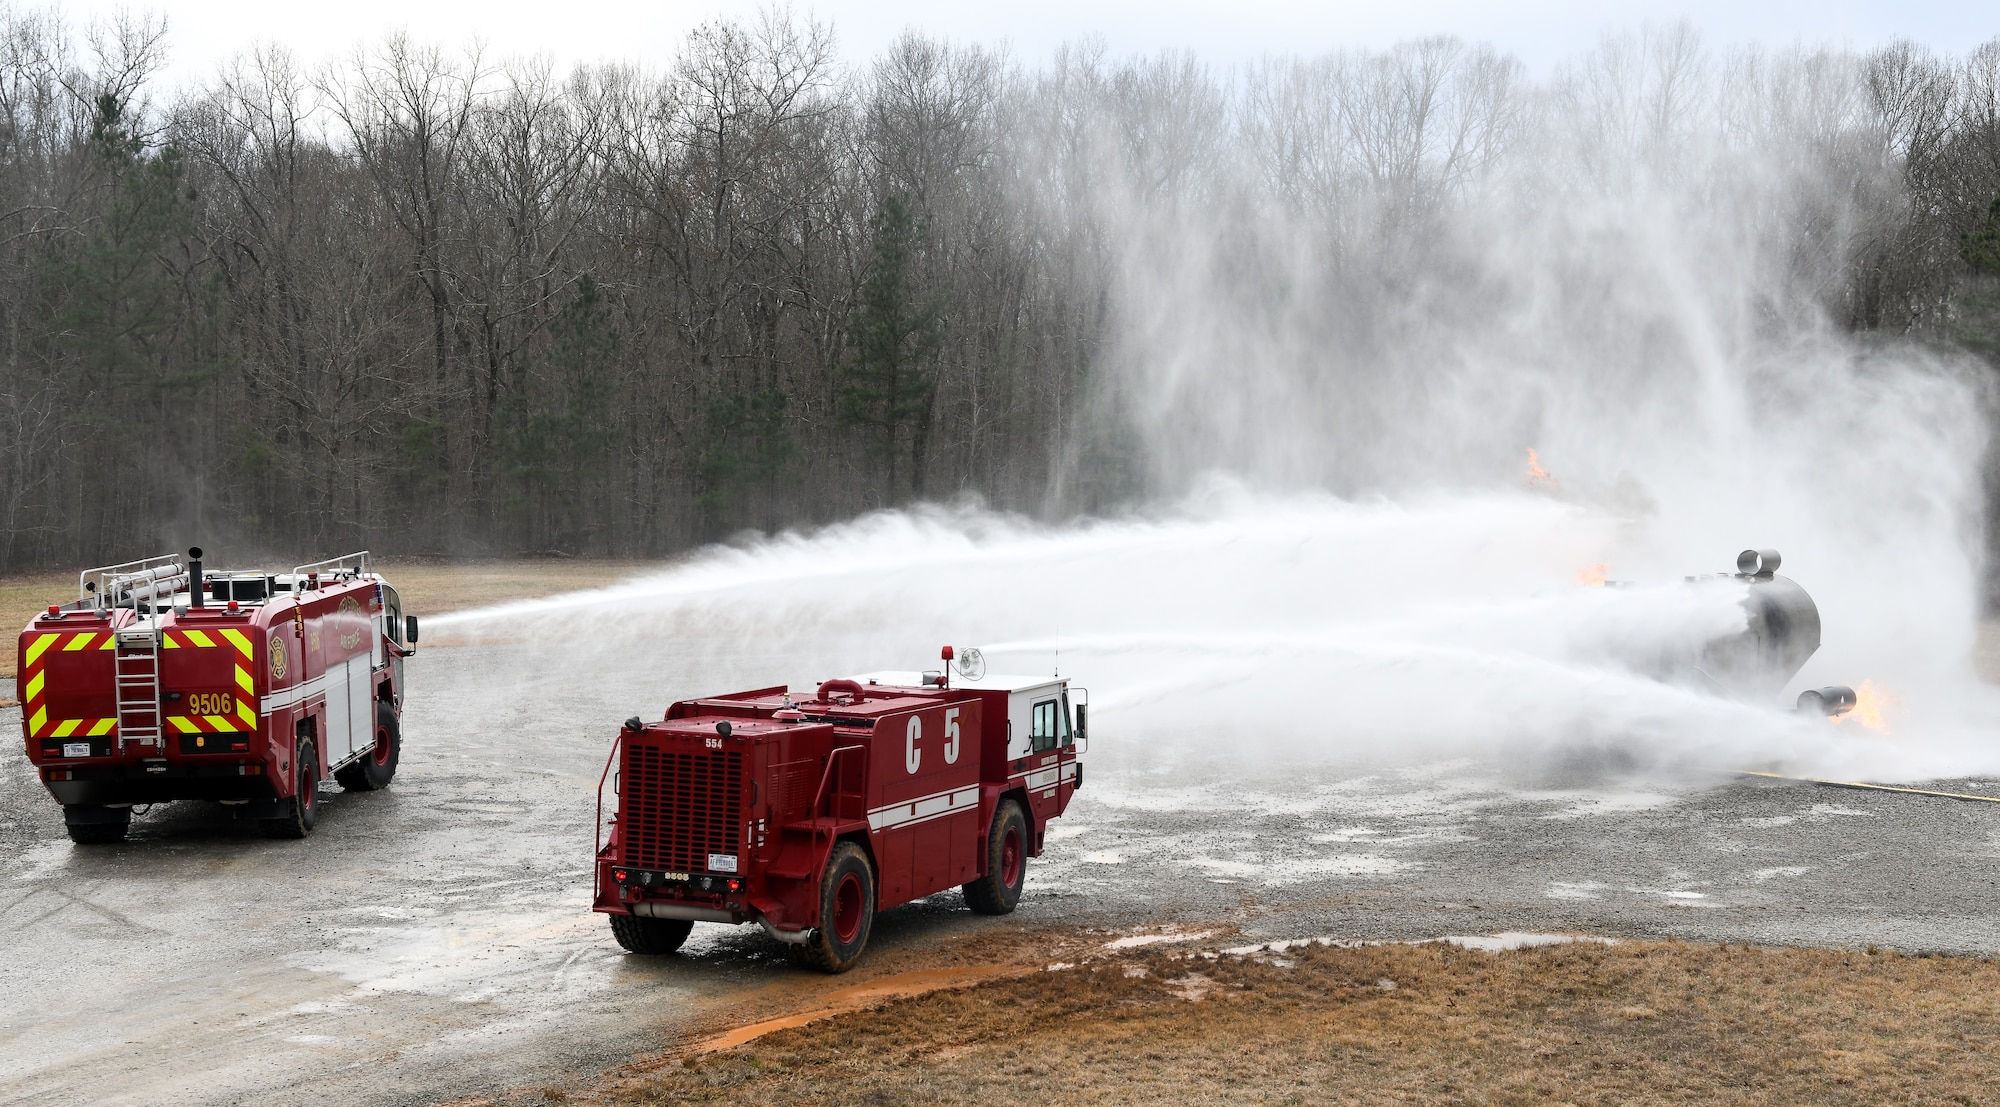 Arnold Air Force Base Fire and Emergency Services personnel attack a fire using vehicle-mounted nozzles while training March 5, 2020, on aircraft rescue and firefighting techniques at a training area on base. (U.S. Air Force photo by Jill Pickett)